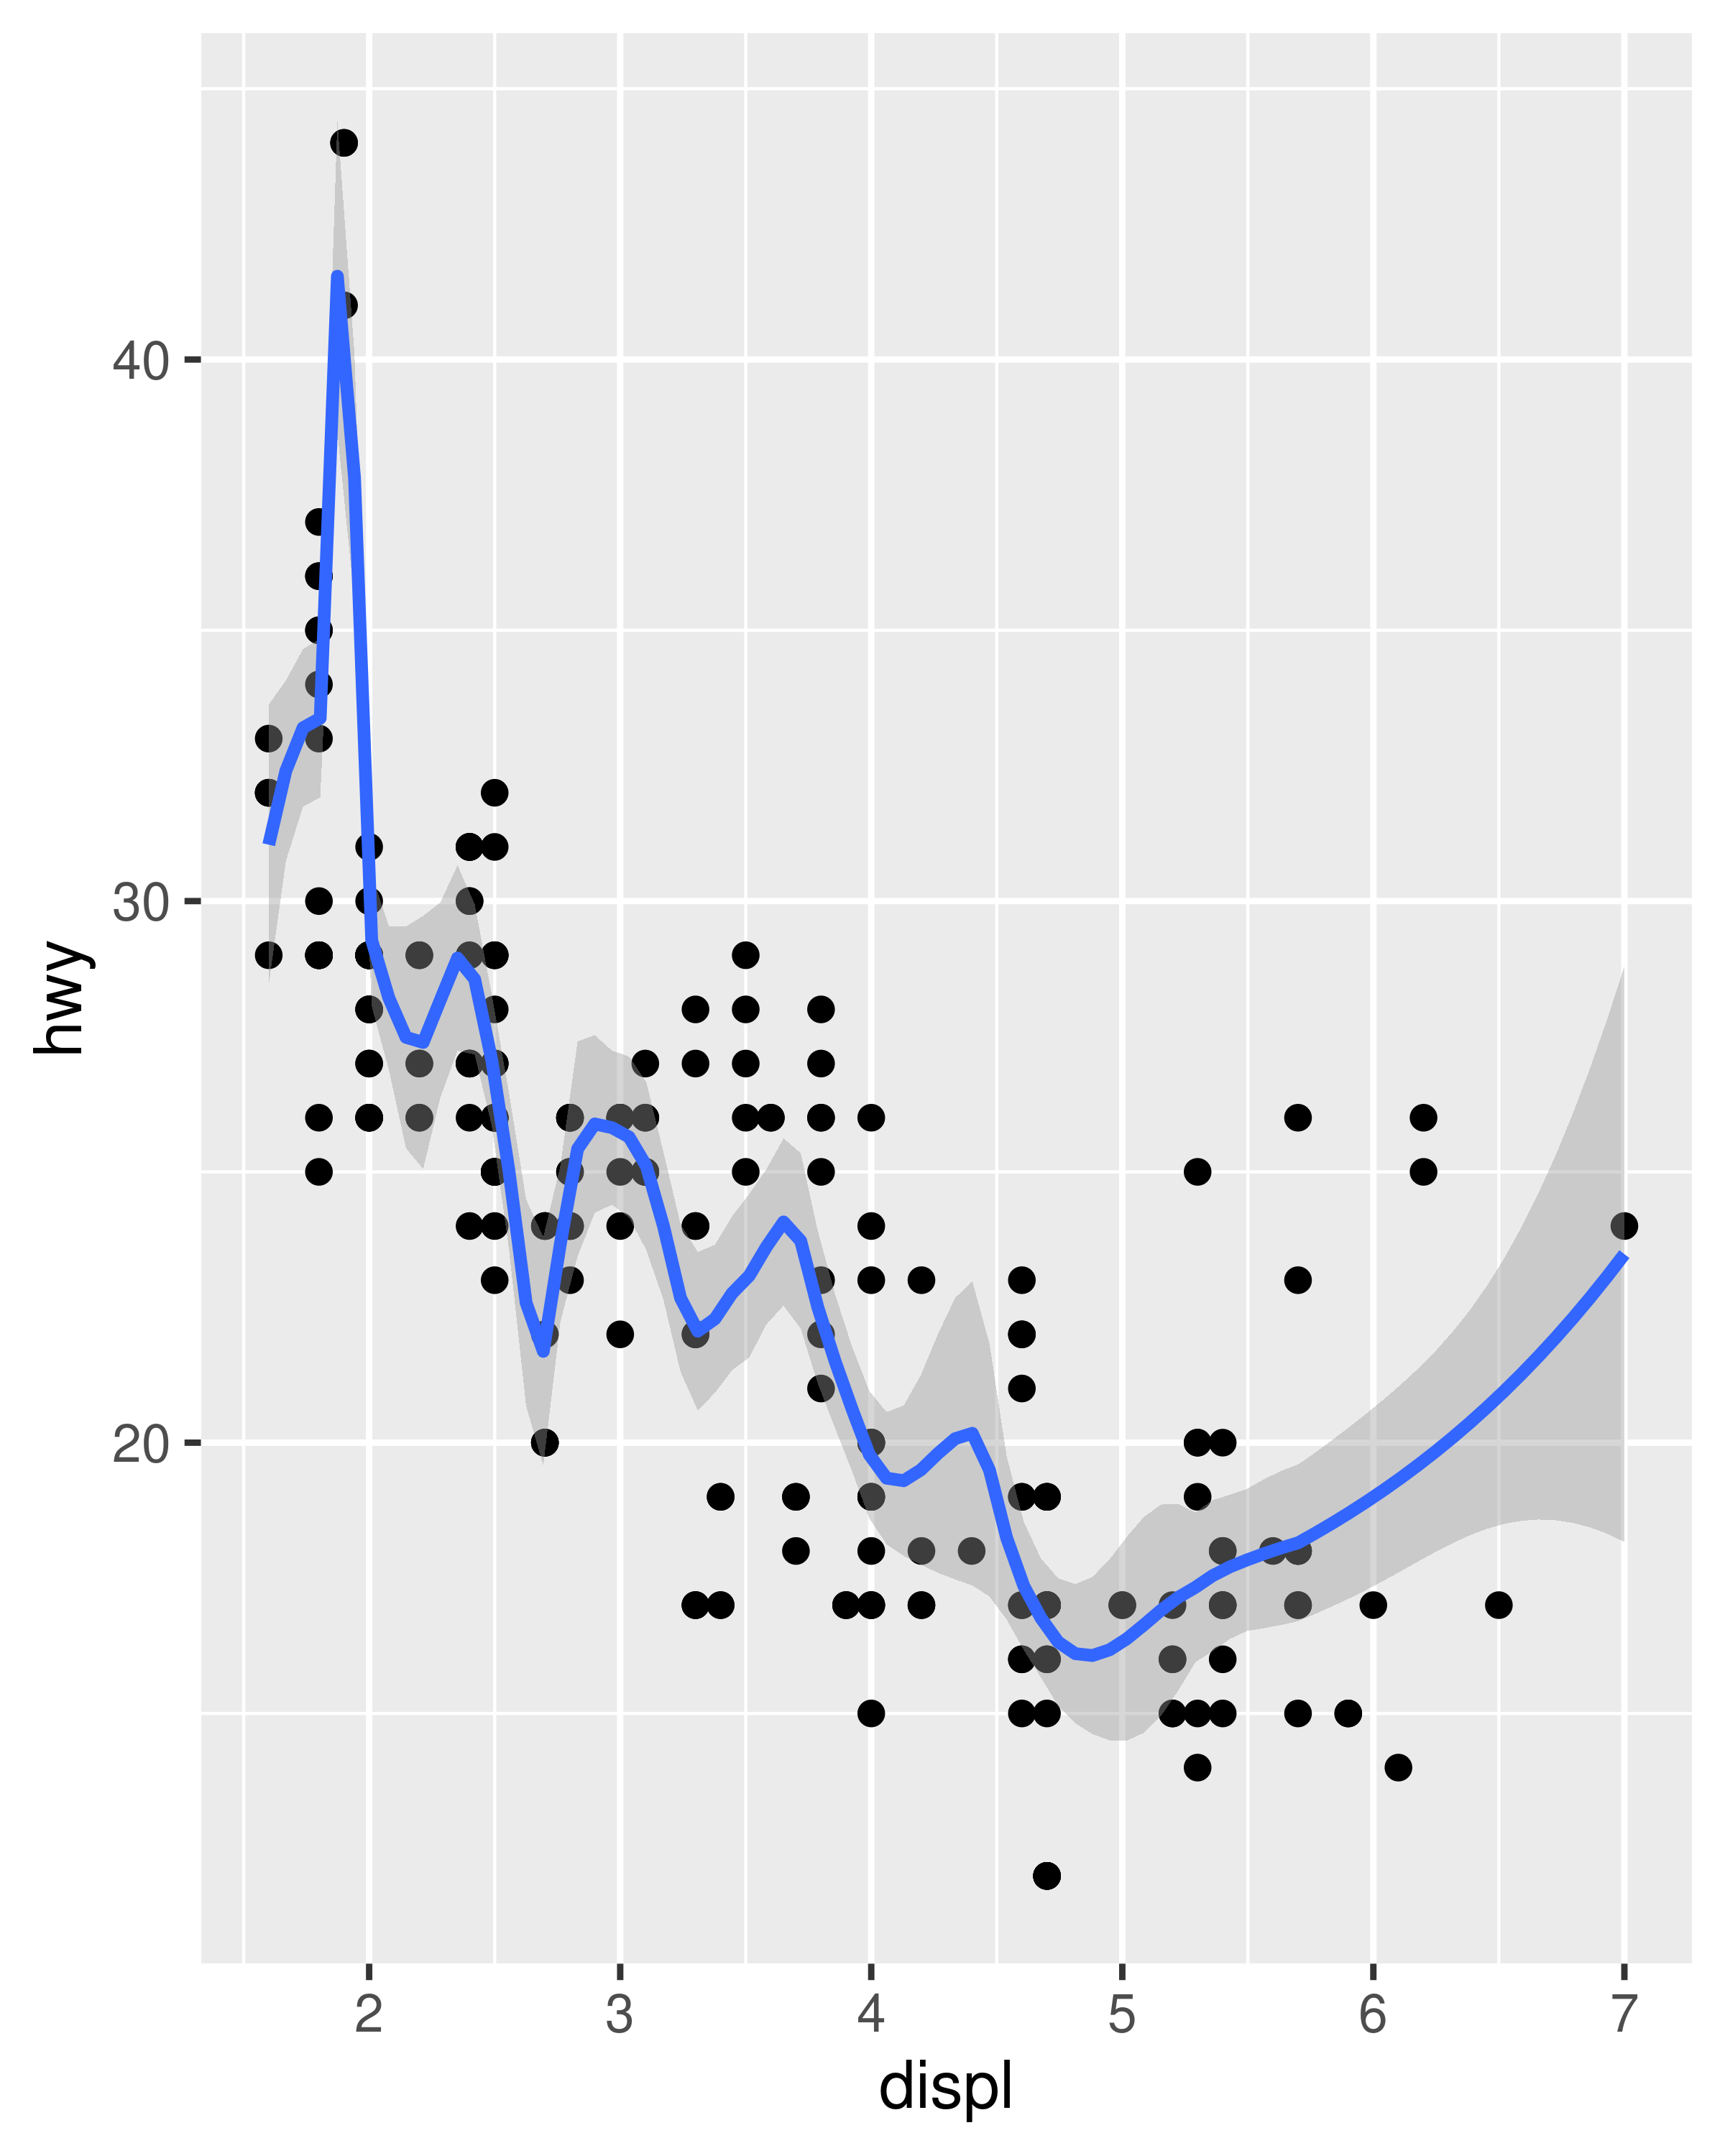 https://ggplot2-book.org/getting-started_files/figure-html/smooth-loess-1.png